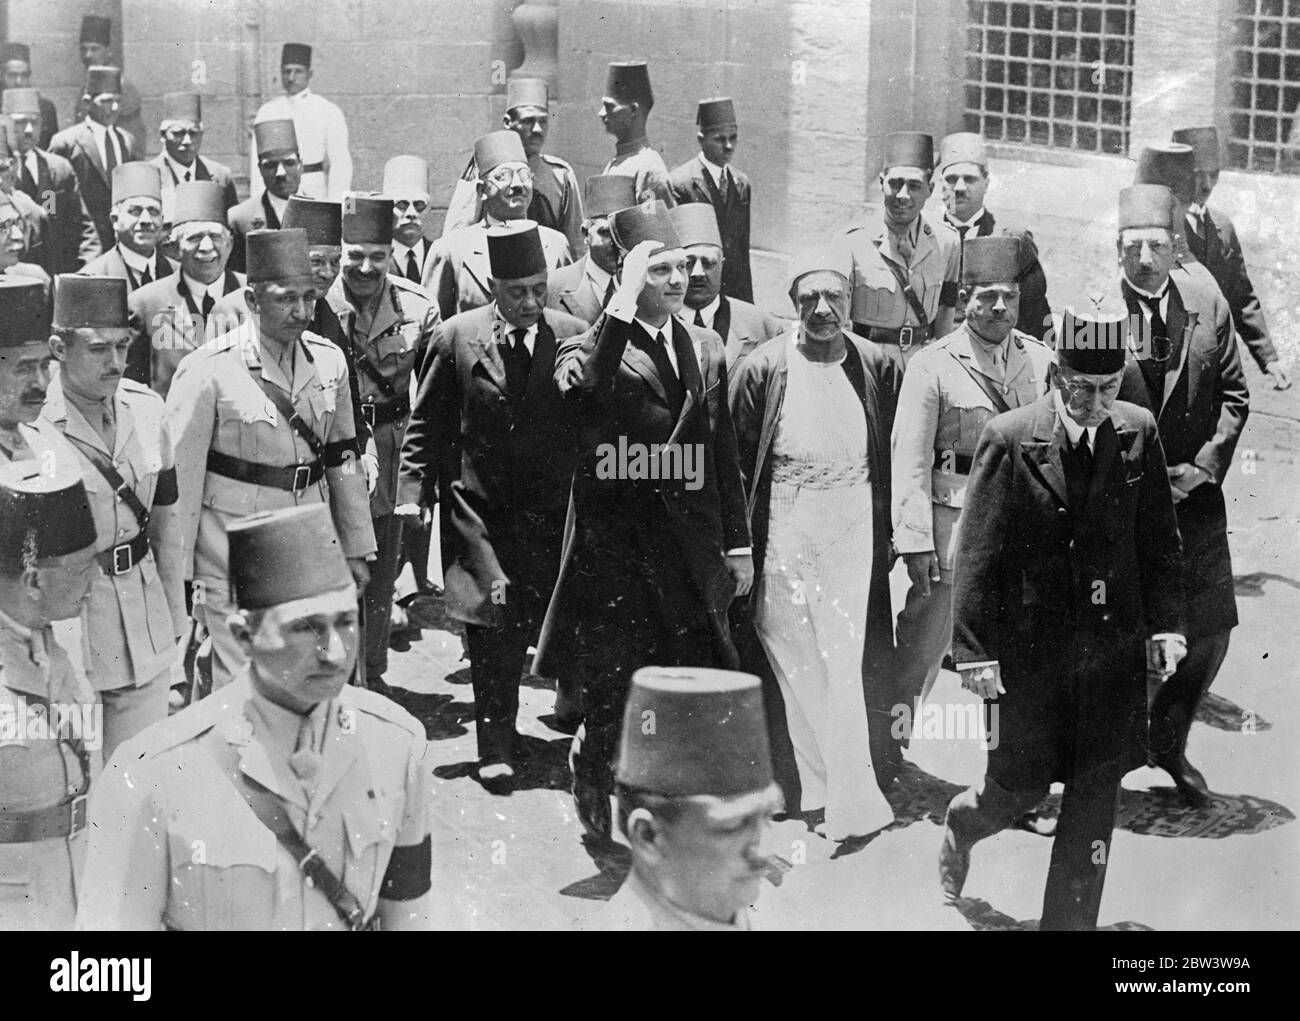 King Farouk Pays Official Visit To His Father ' s Tomb The 16 - year - old King Farouk of Egypt , accompanied by members of the Court , paid offcial visit to the tomb of his father , King Fuad , who died while the young King was studying in England . Crowds cheered the boy King as he drove through the streets of Cairo to the Rifai Mosque . Photo shows : King Farouk saluting as he arrived at the Rifai Mosque [ Al - Rifa ' i , Al - Refai , Al - Refa ' i Mosque ,  Royal Mosque  ] 2 June 1936 Stock Photo